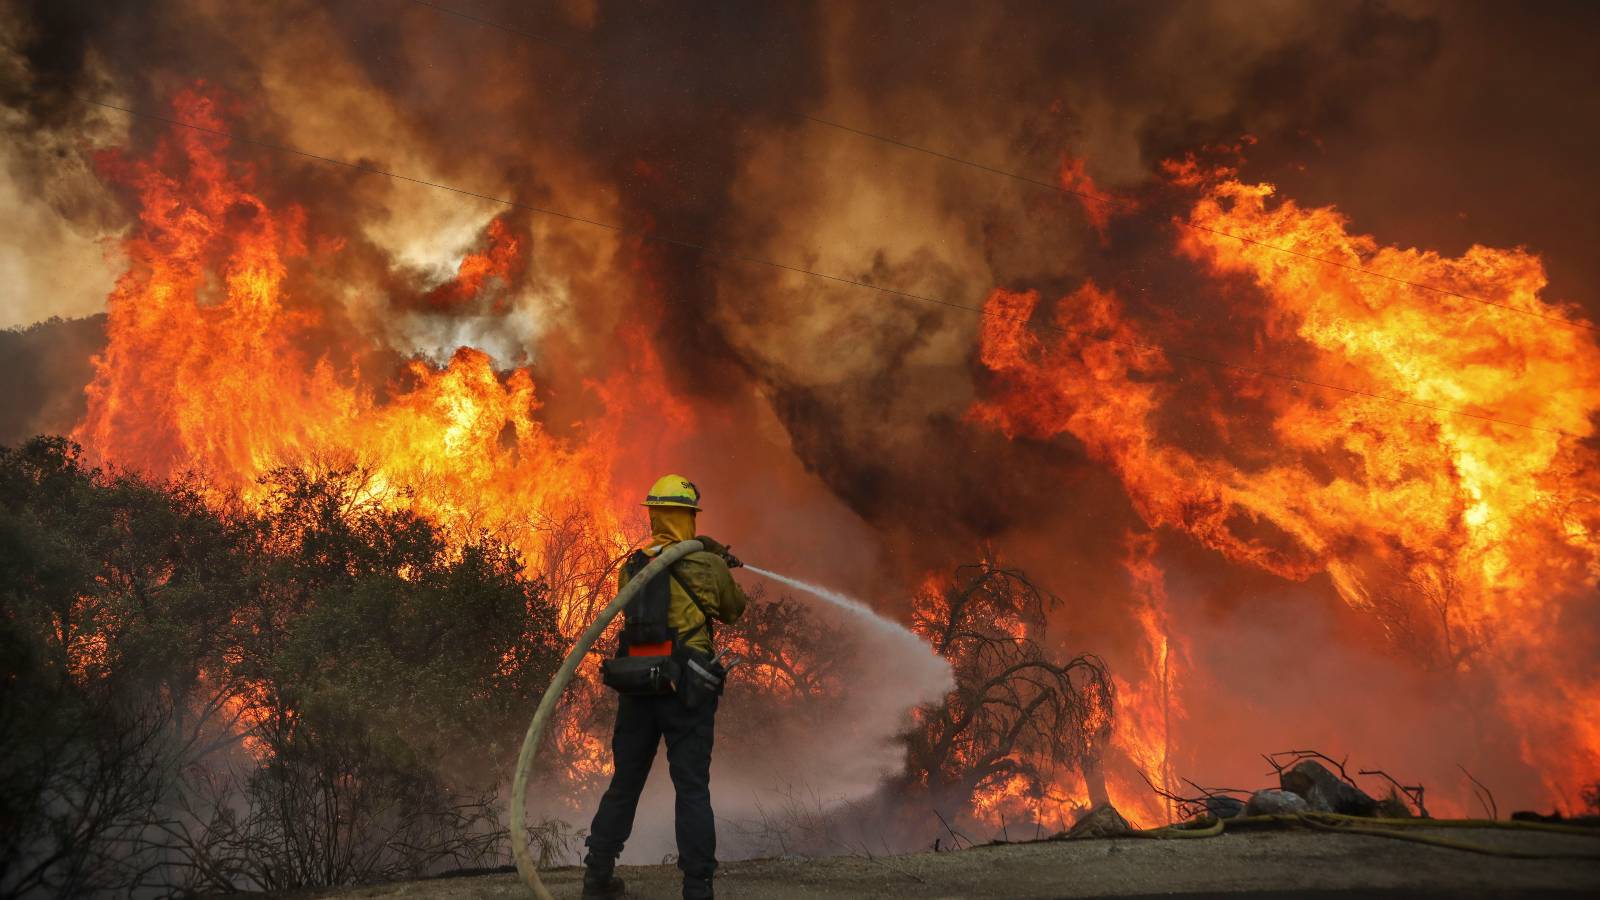 Firefighter fights wildfire blaze in San Miguel County, California.